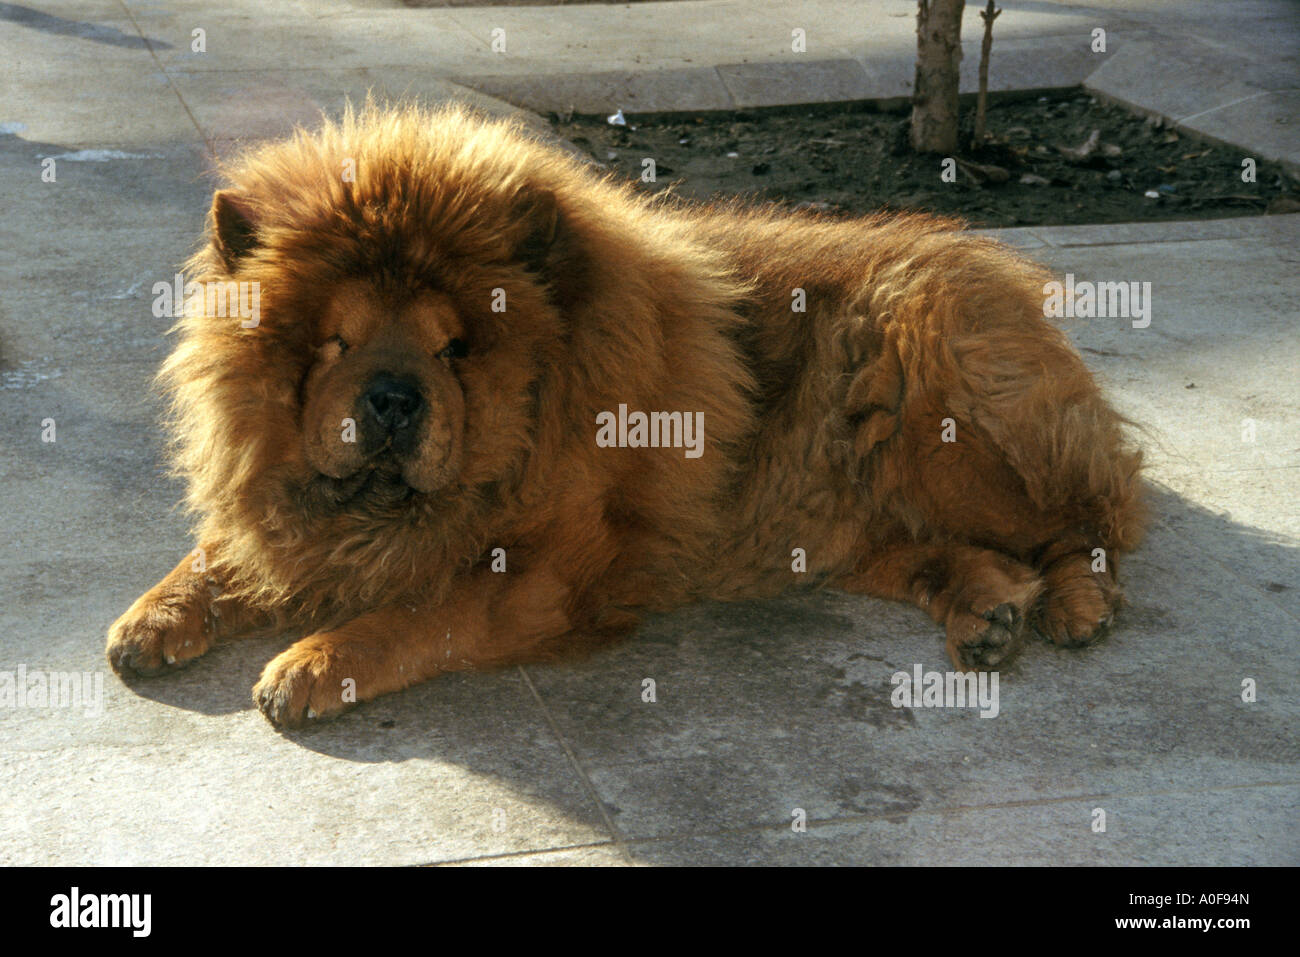 Huge lion-like dog with ginger fur backlit in the road in Istanbul Turkey Stock Photo